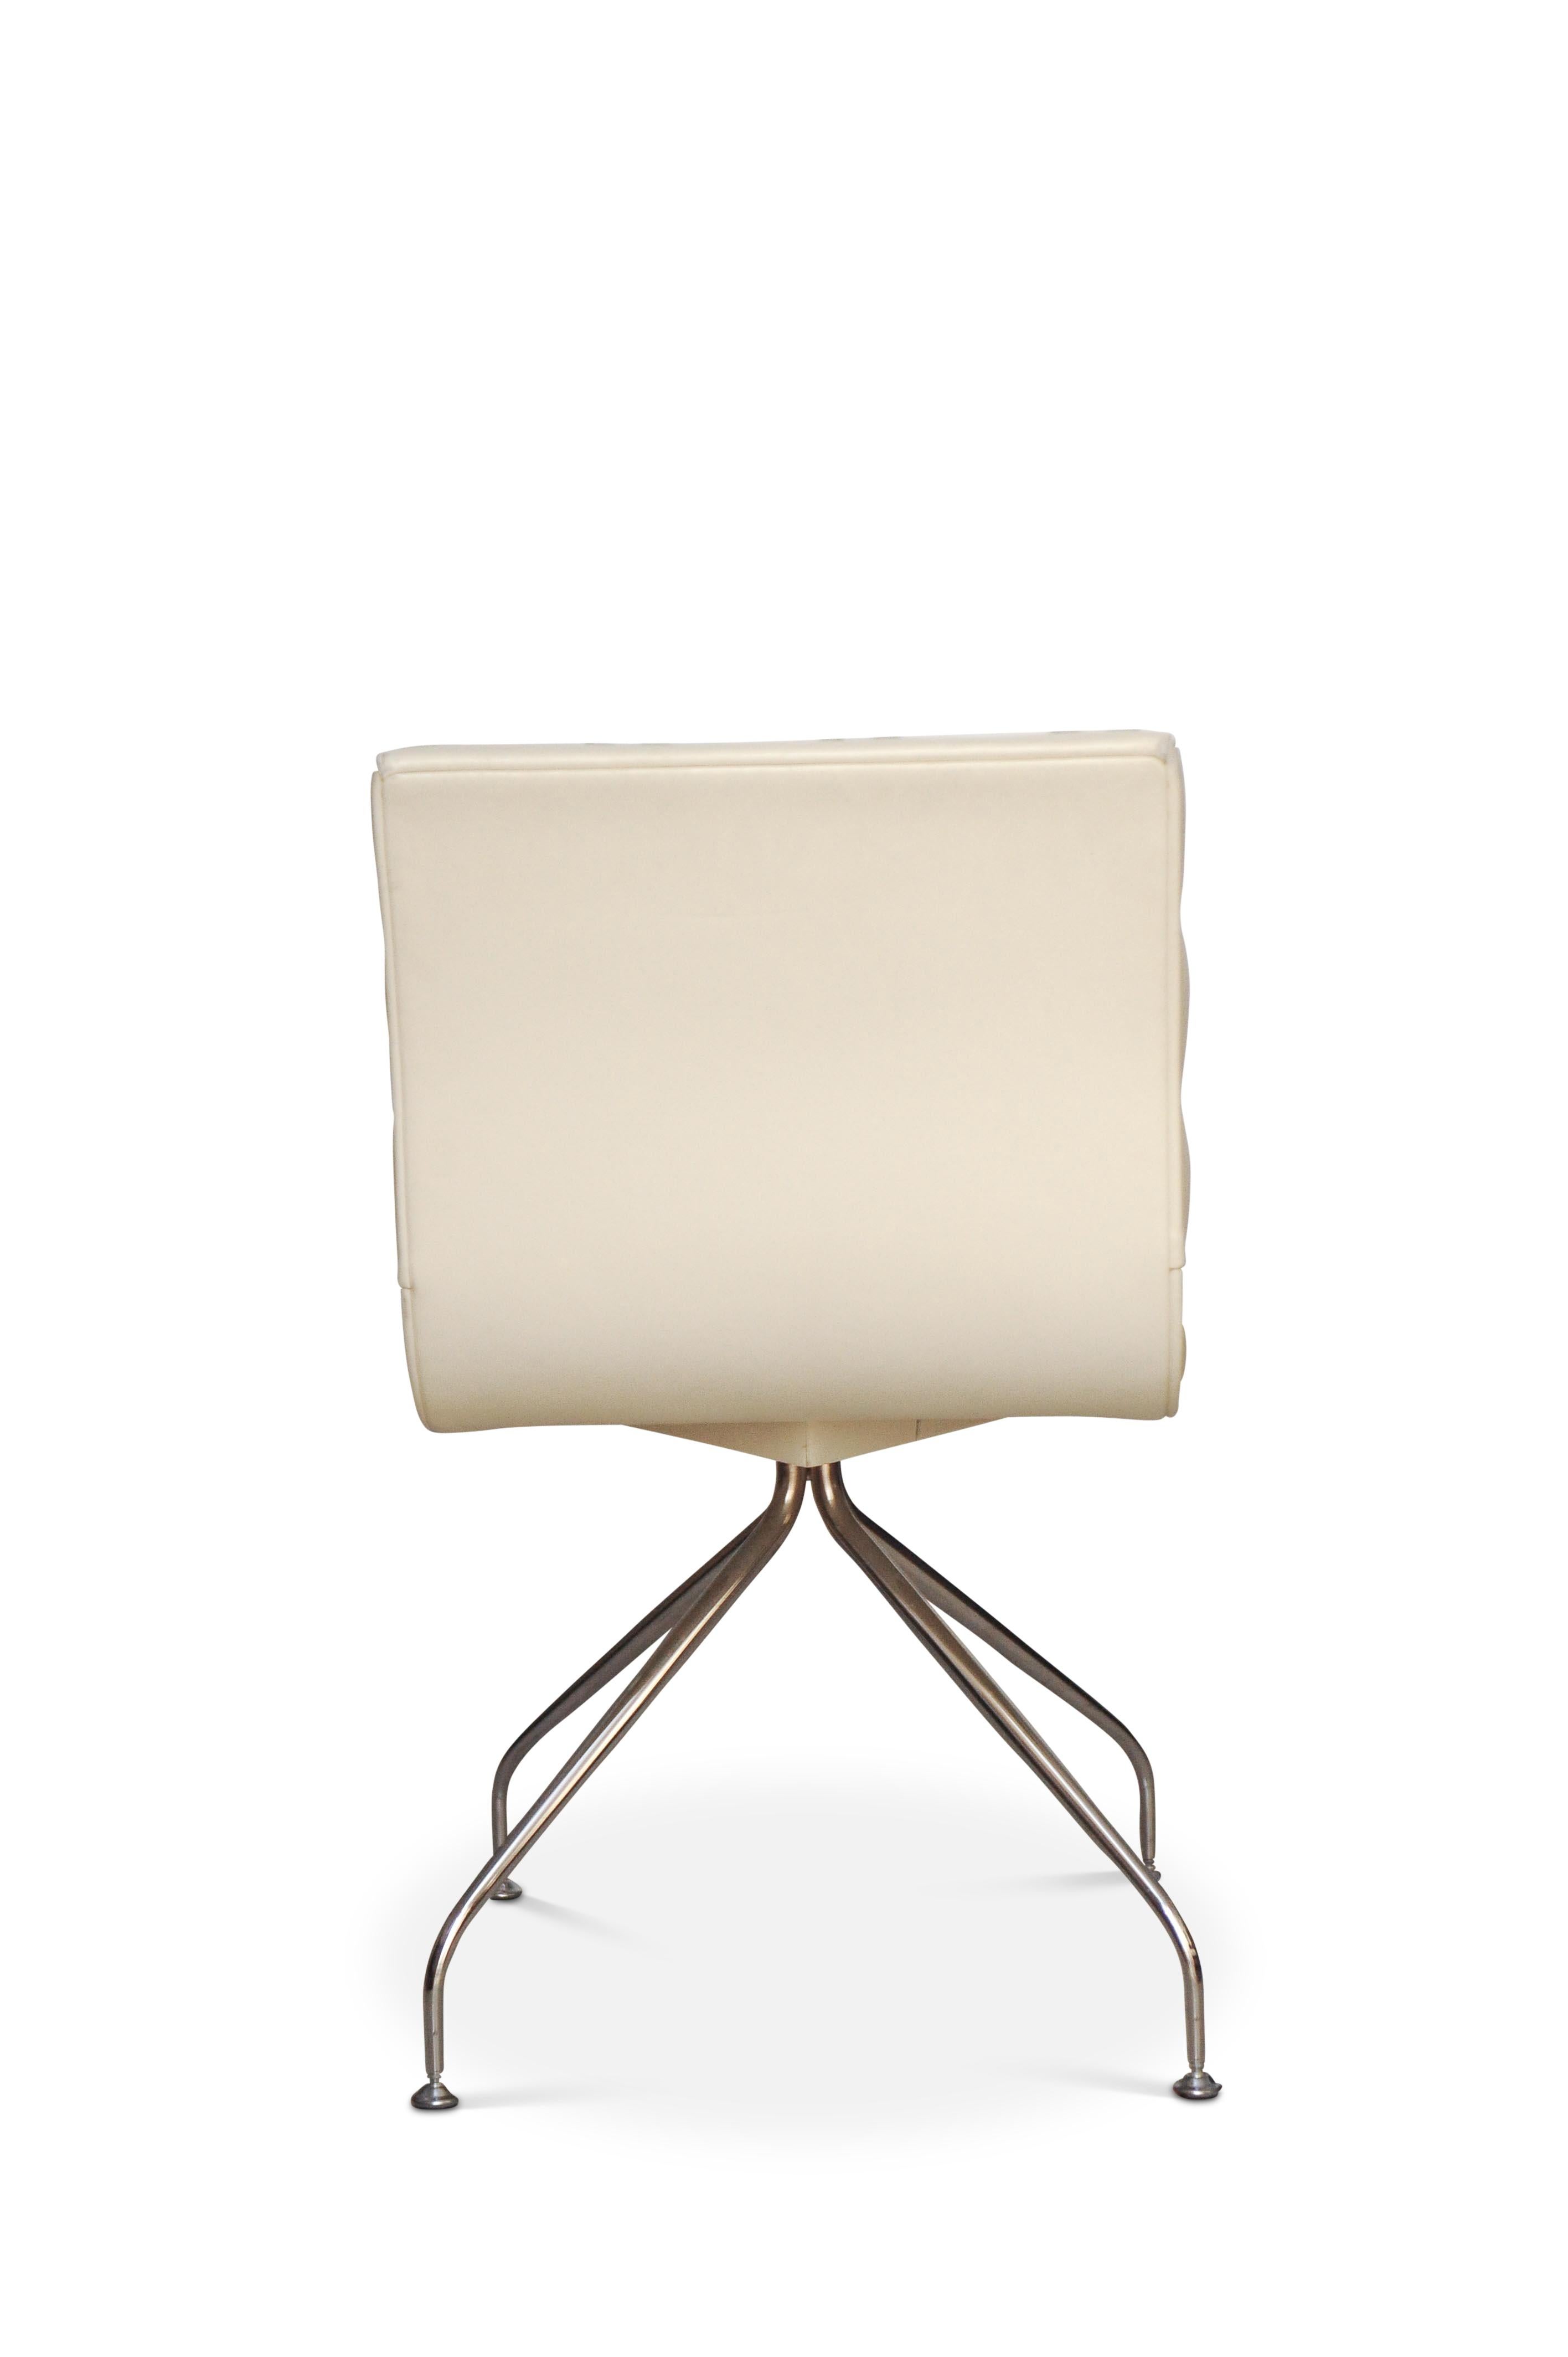 Italian Giovanna Modonutti 'Giofra' for Frag, a Set of 4 White Leather 'Canouan' Chairs For Sale